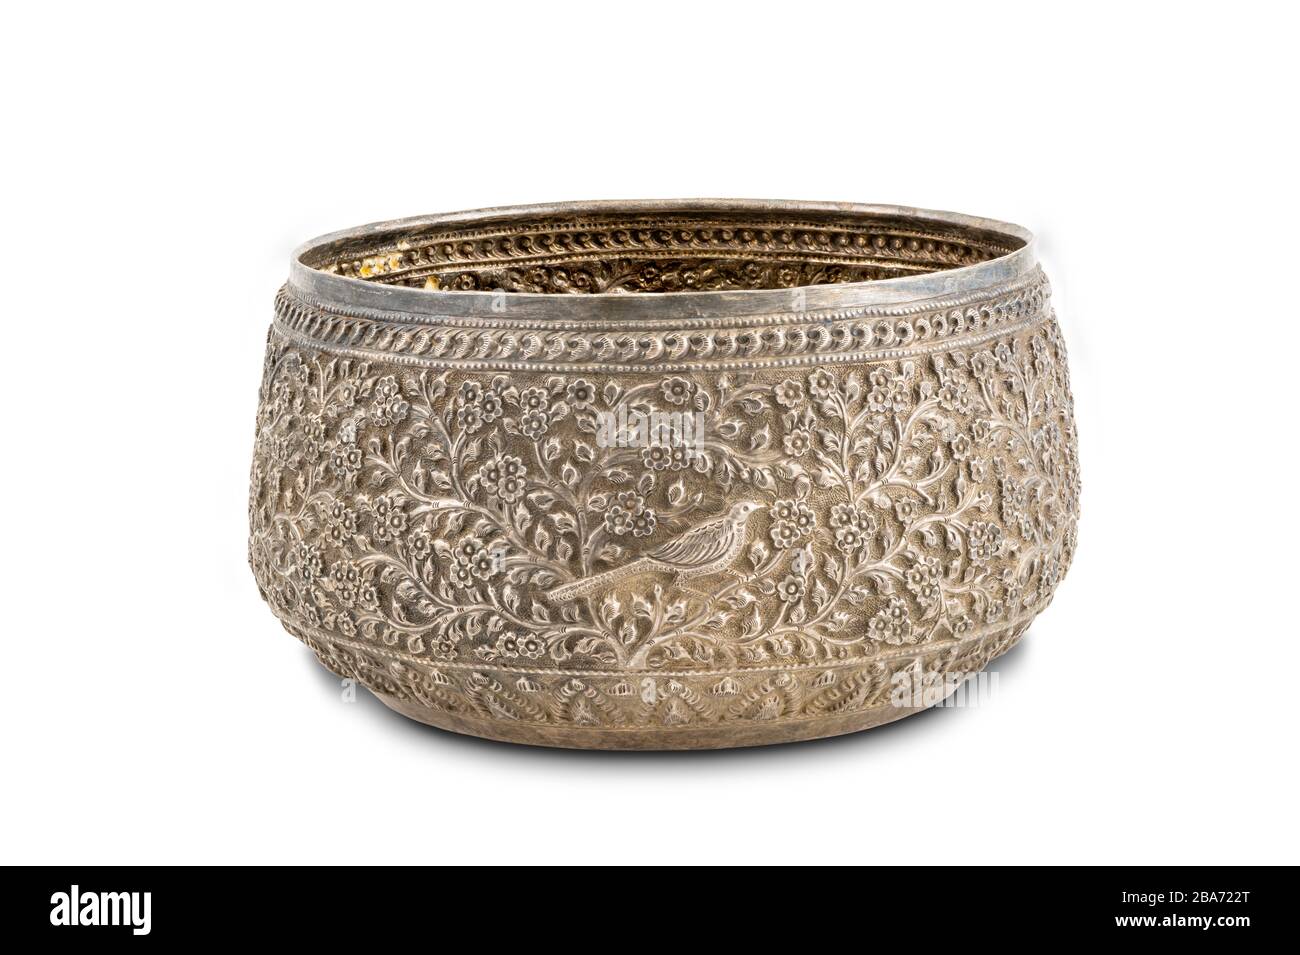 Ancient Thai style silver bowl handcraft vintage on white background with clipping path. Stock Photo